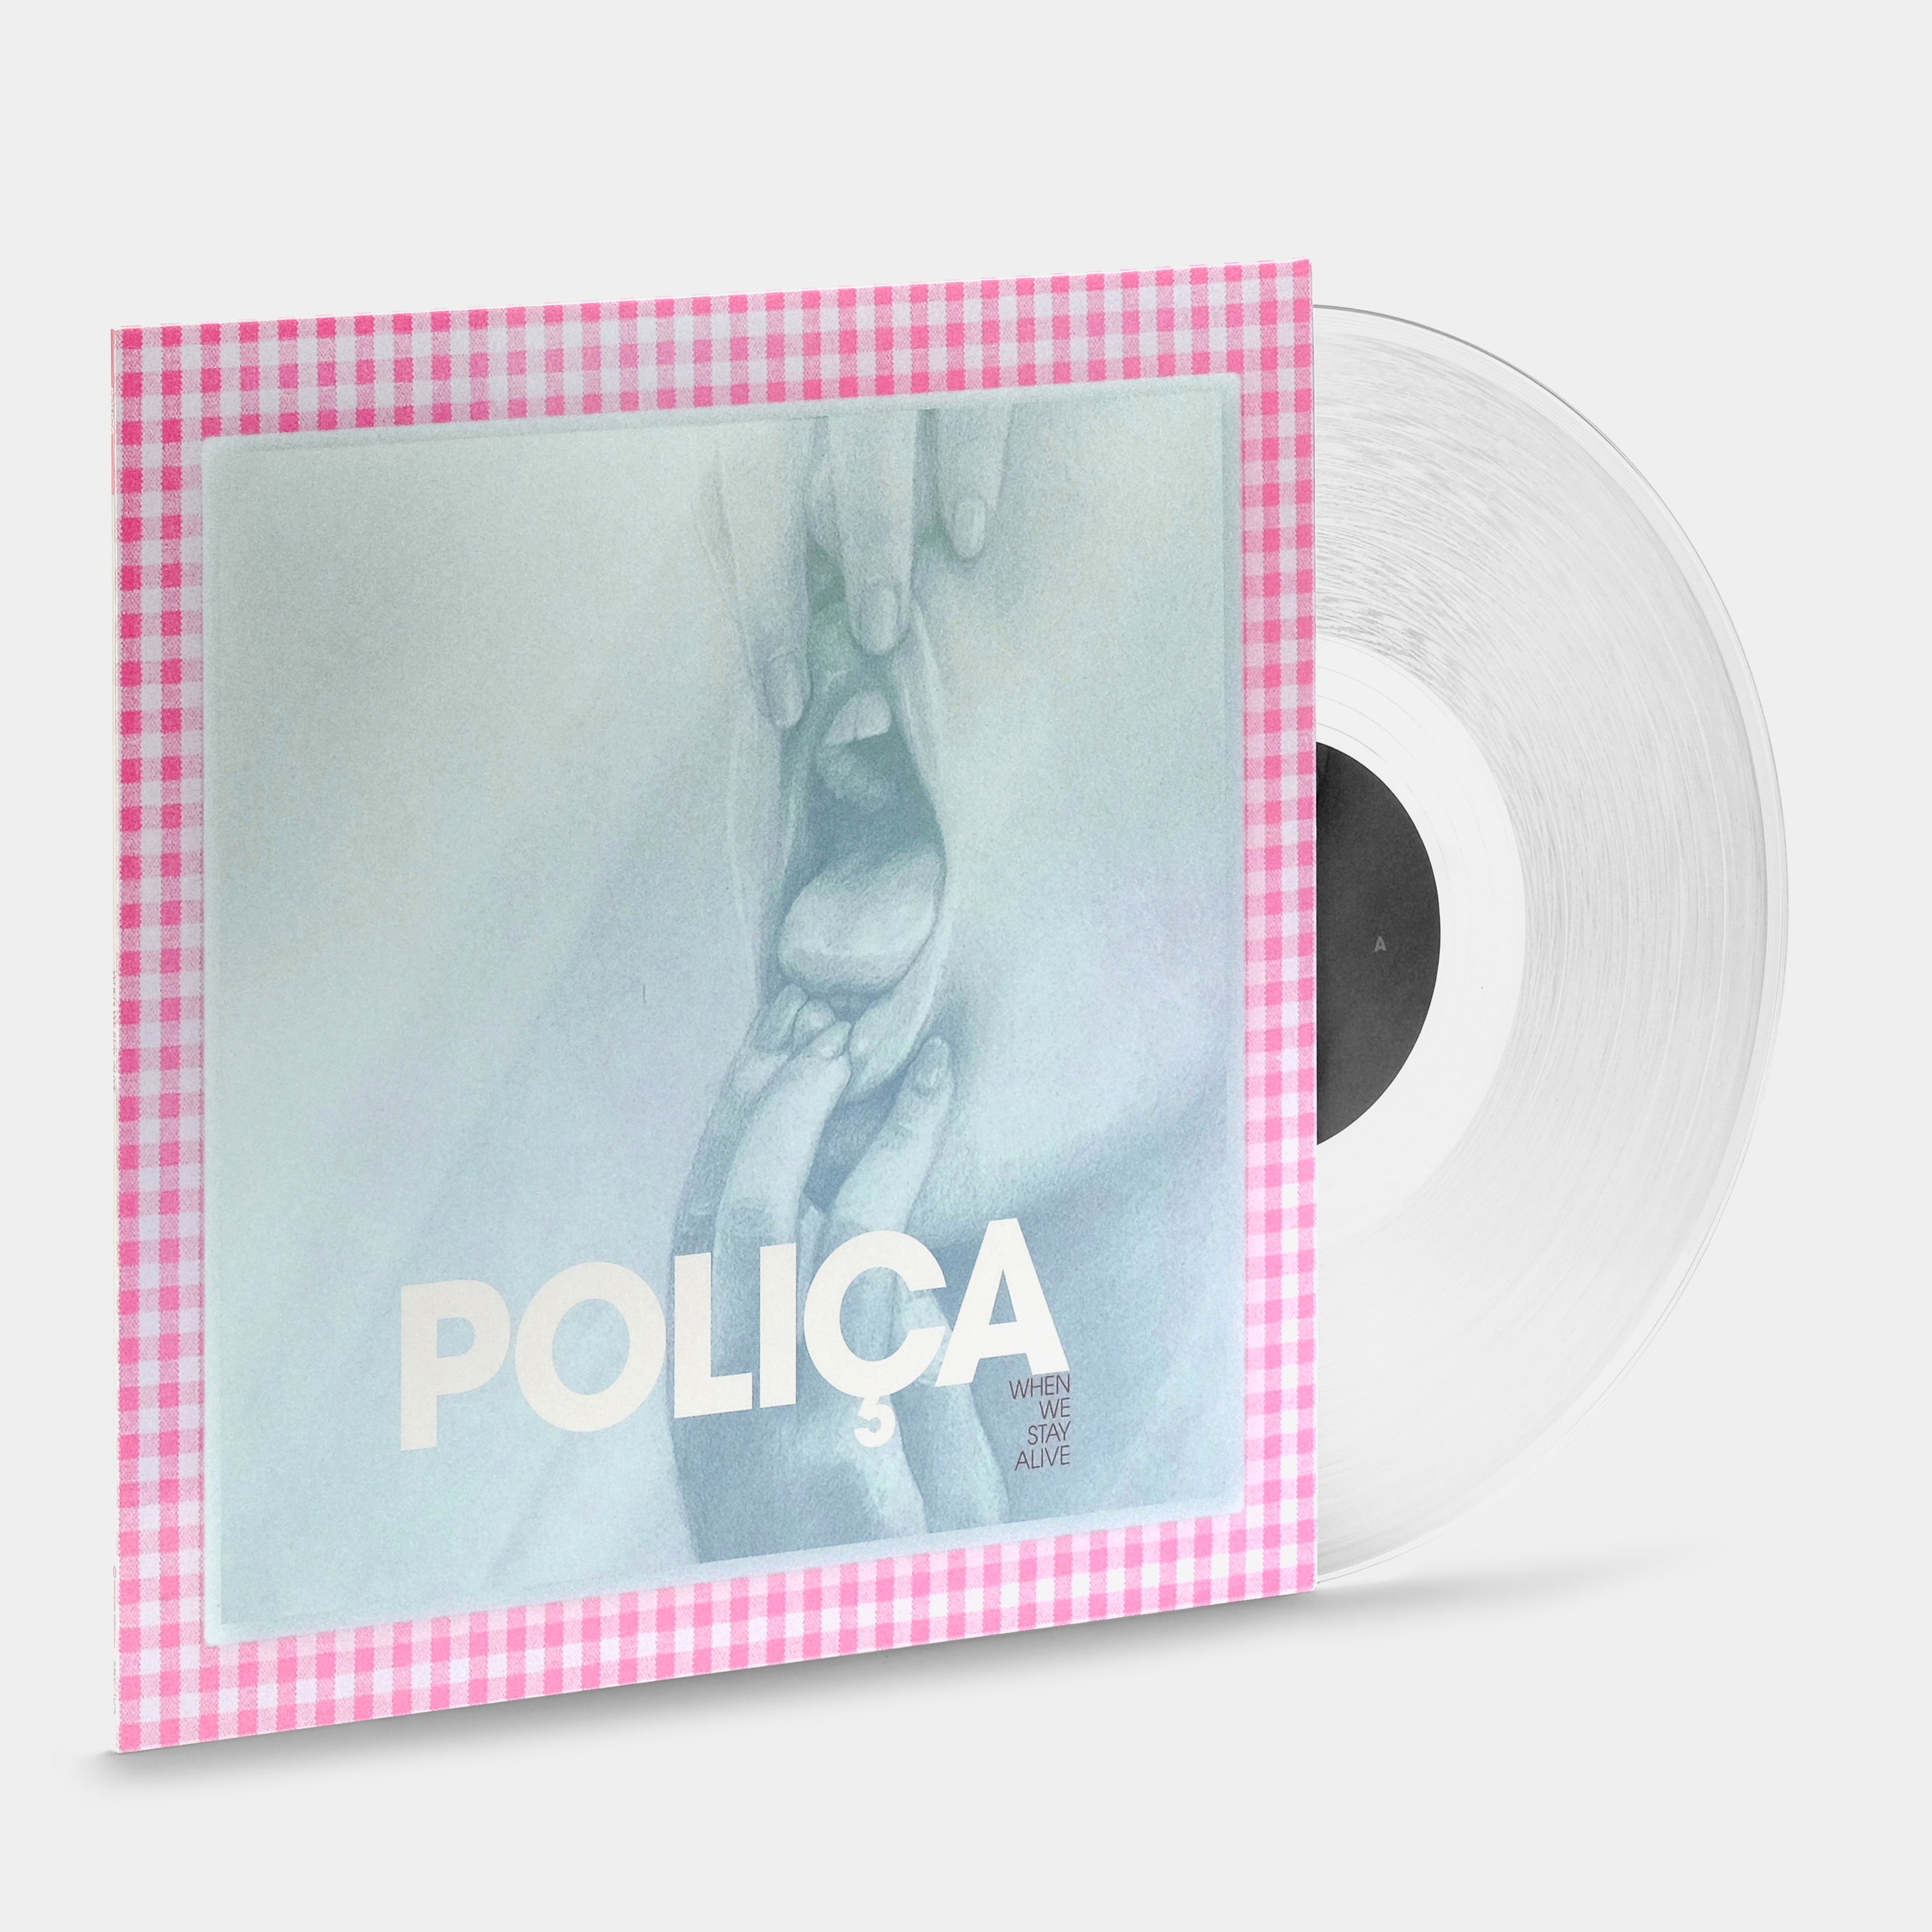 Poliça - When We Stay Alive LP Crystal Clear Vinyl Record